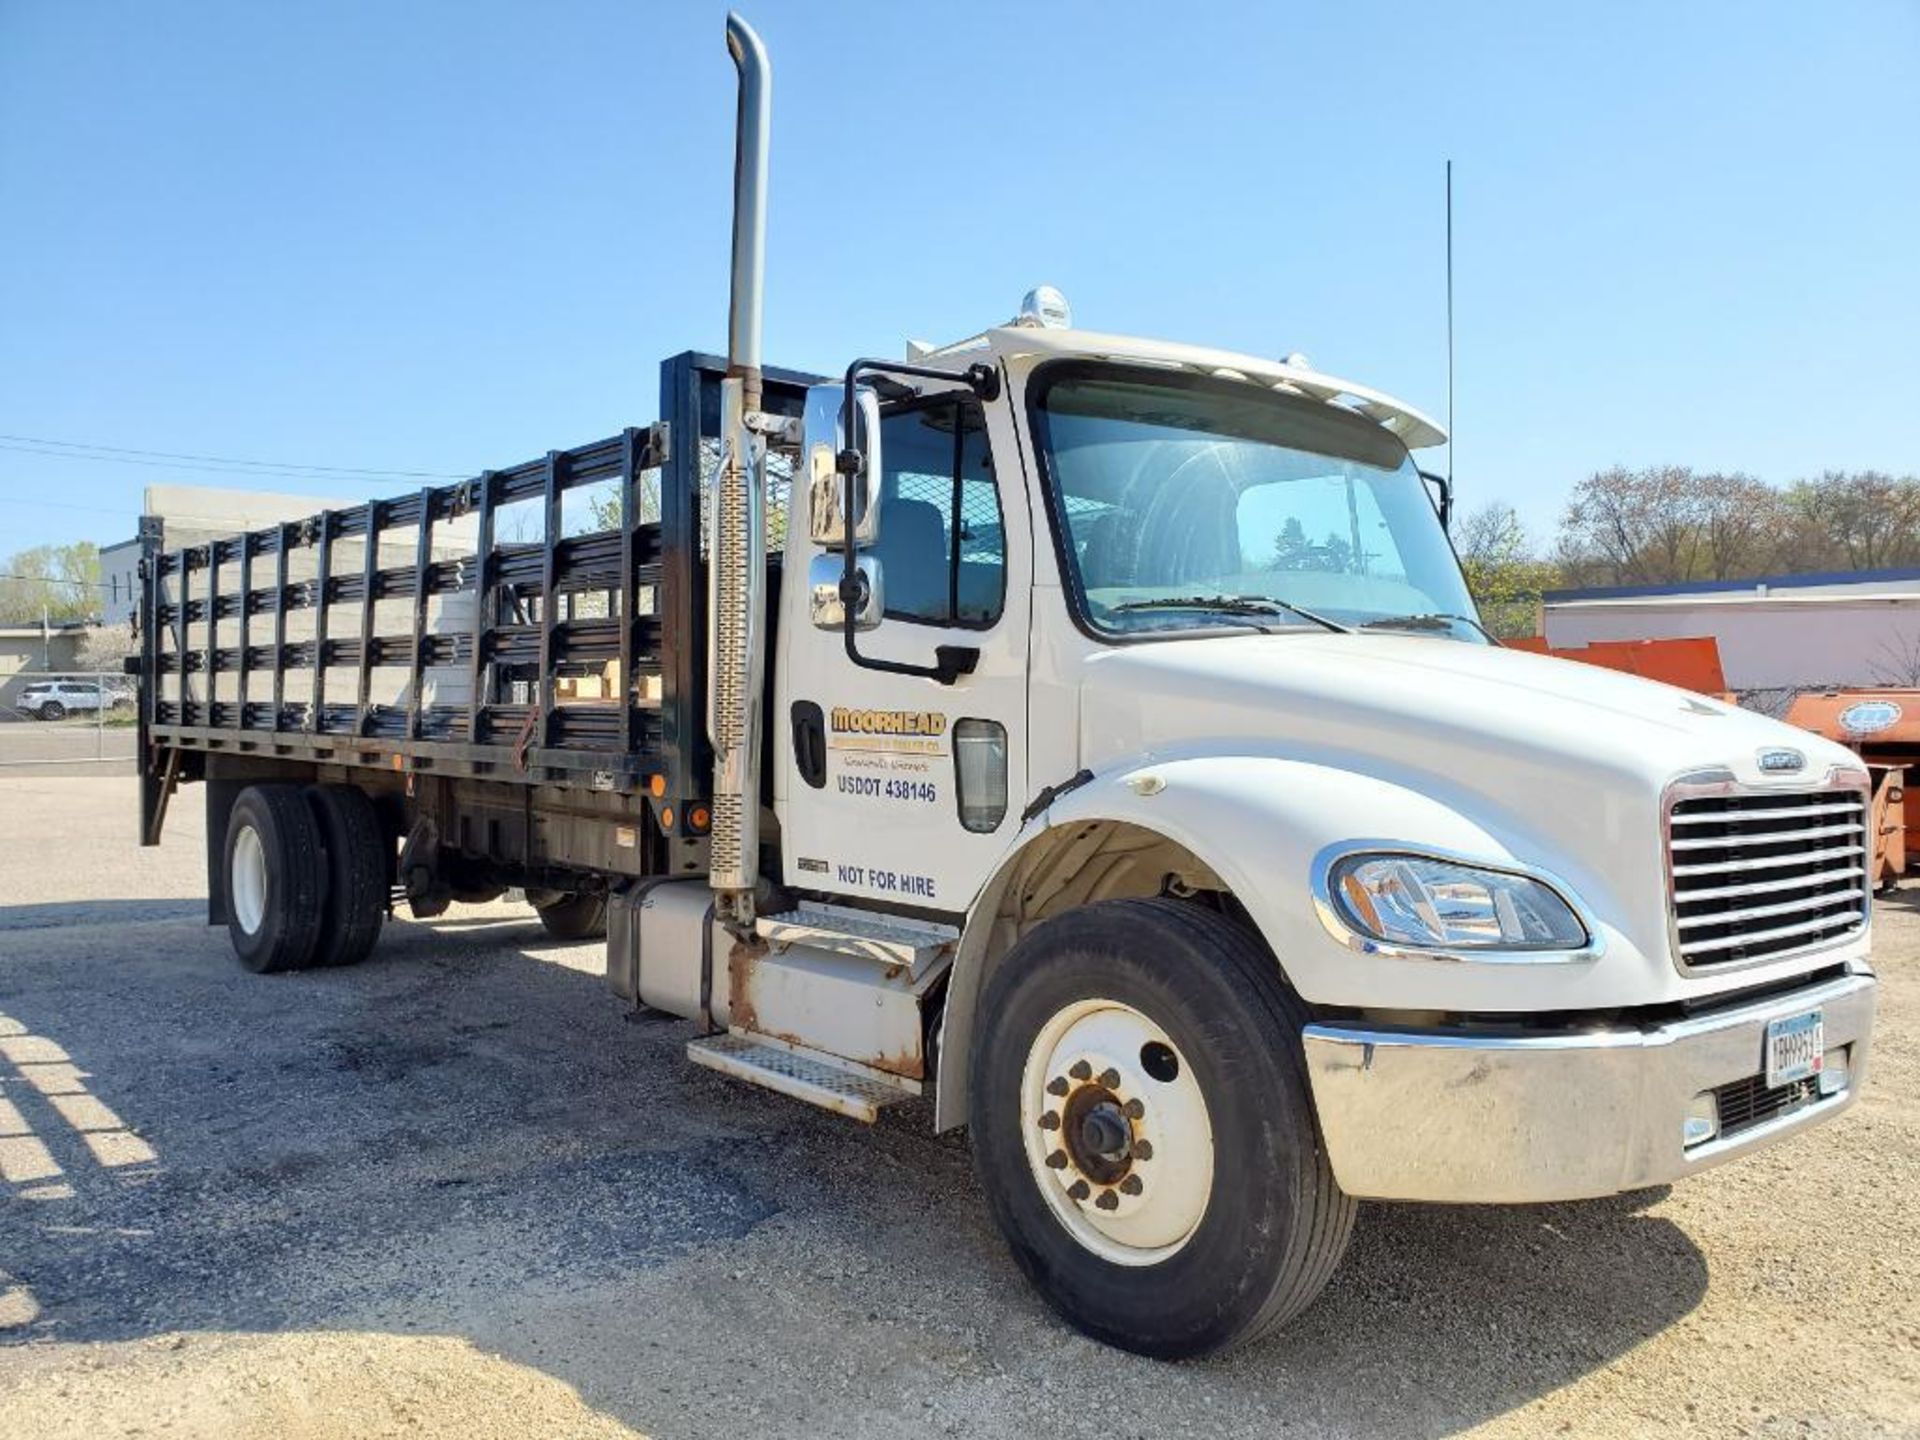 NOVEMBER 2012 FREIGHTLINER BUSINESS CLASS M2 STAKE BED TRUCK, 88,207.9 MILES, VIN 1FVACXDT5CDBL6833 - Image 10 of 20